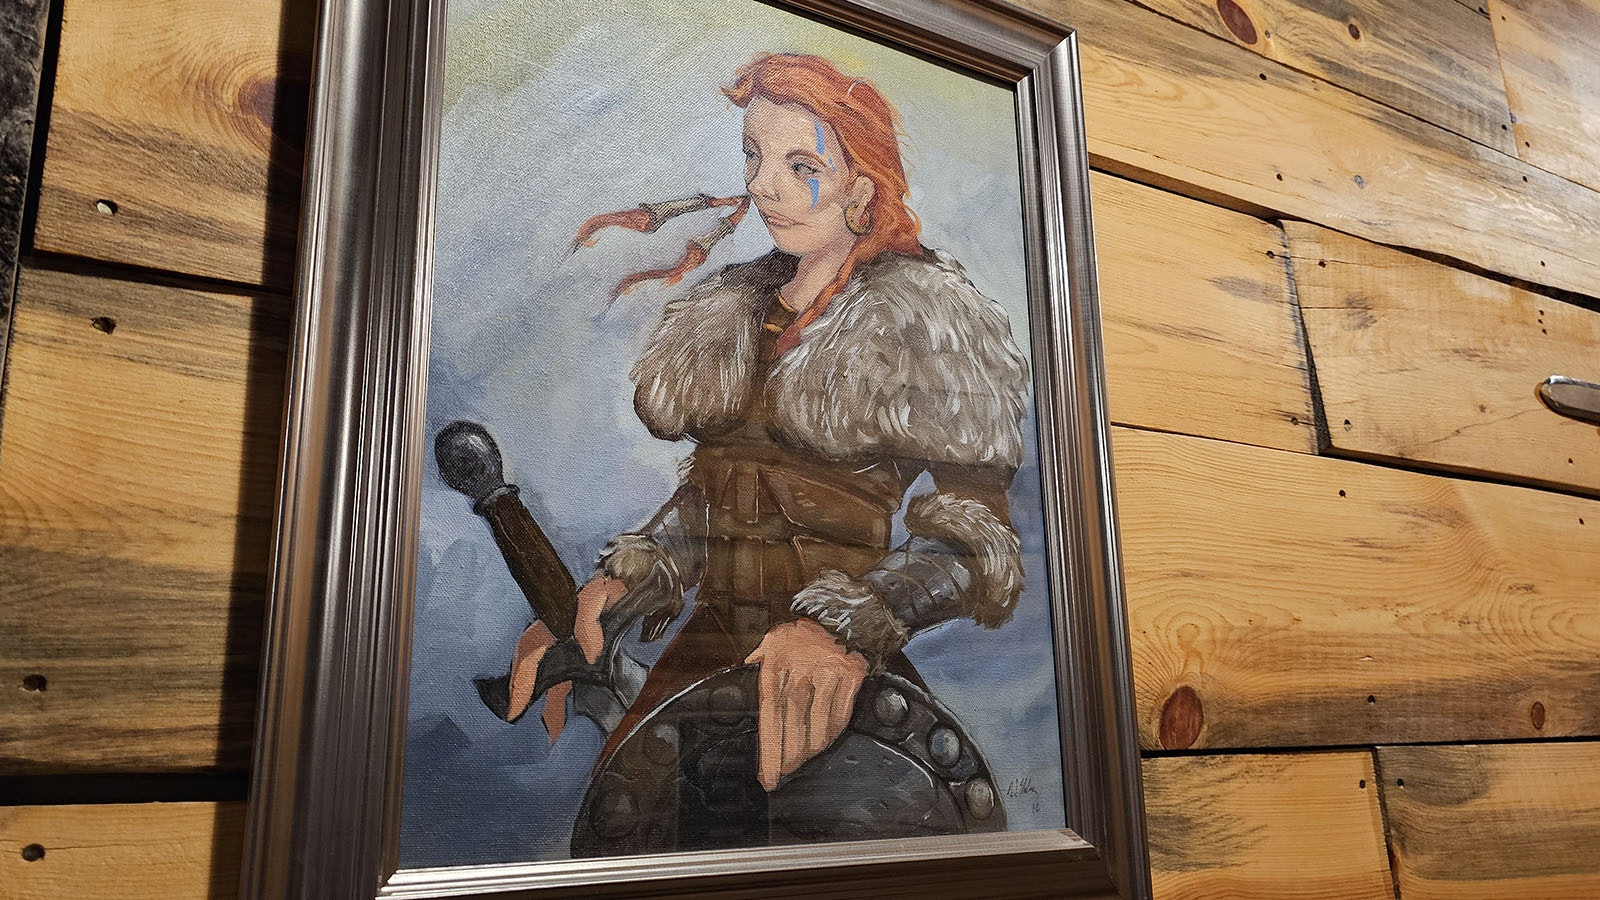 Crazy Woman points the way to the ladies room in Big Lost Meadery. She is a Viking shield maiden you don't  want to meet on the battle field — unless she's on your side.